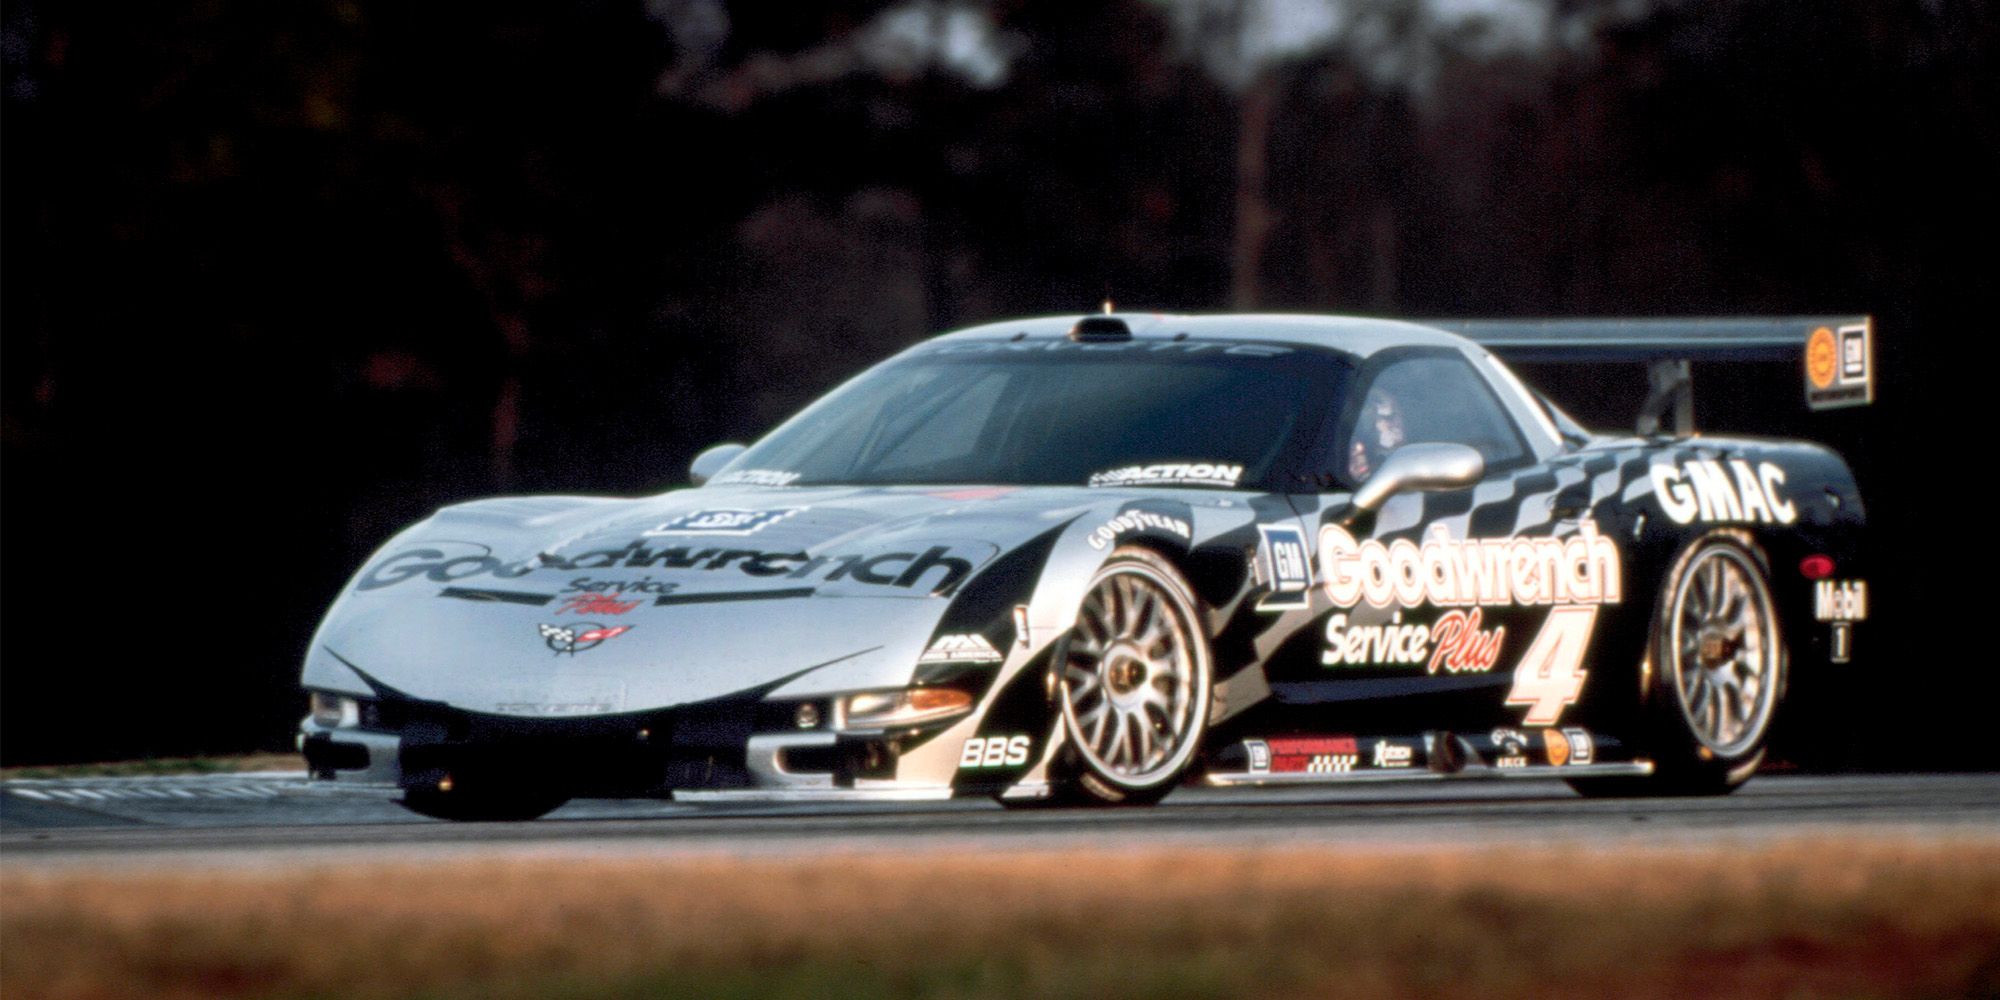 Goodwrench C5.R